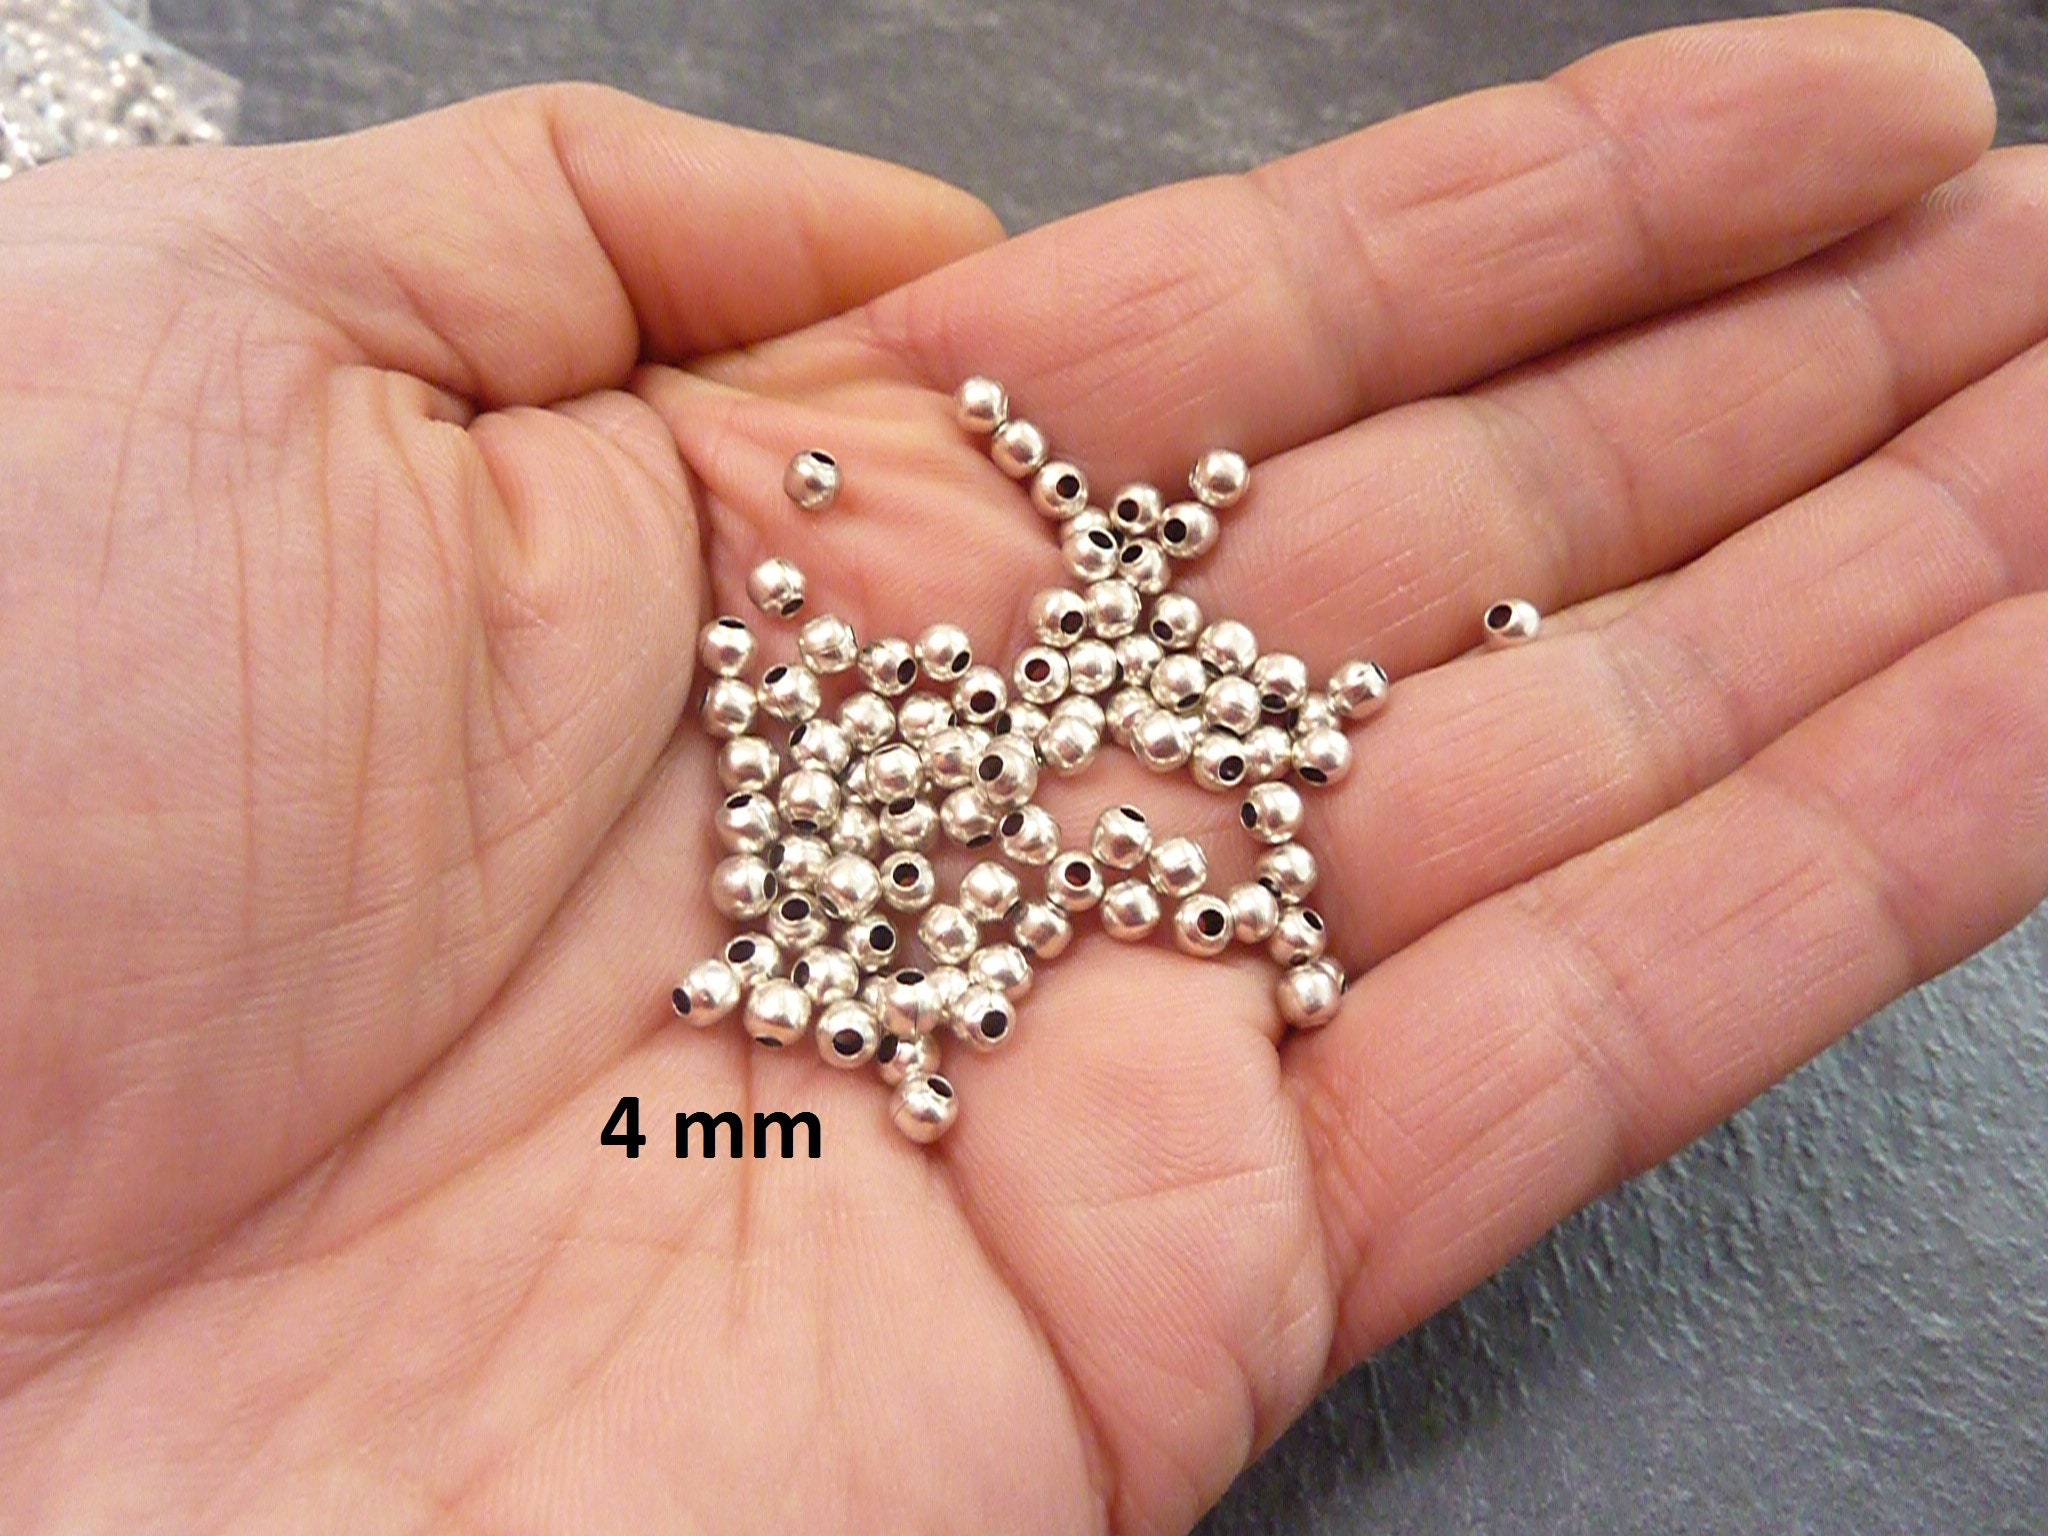 200pcs Sterling Silver 925 Beads 2mm, 2.2mm, 2.5mm, 3.0mm, Spacers